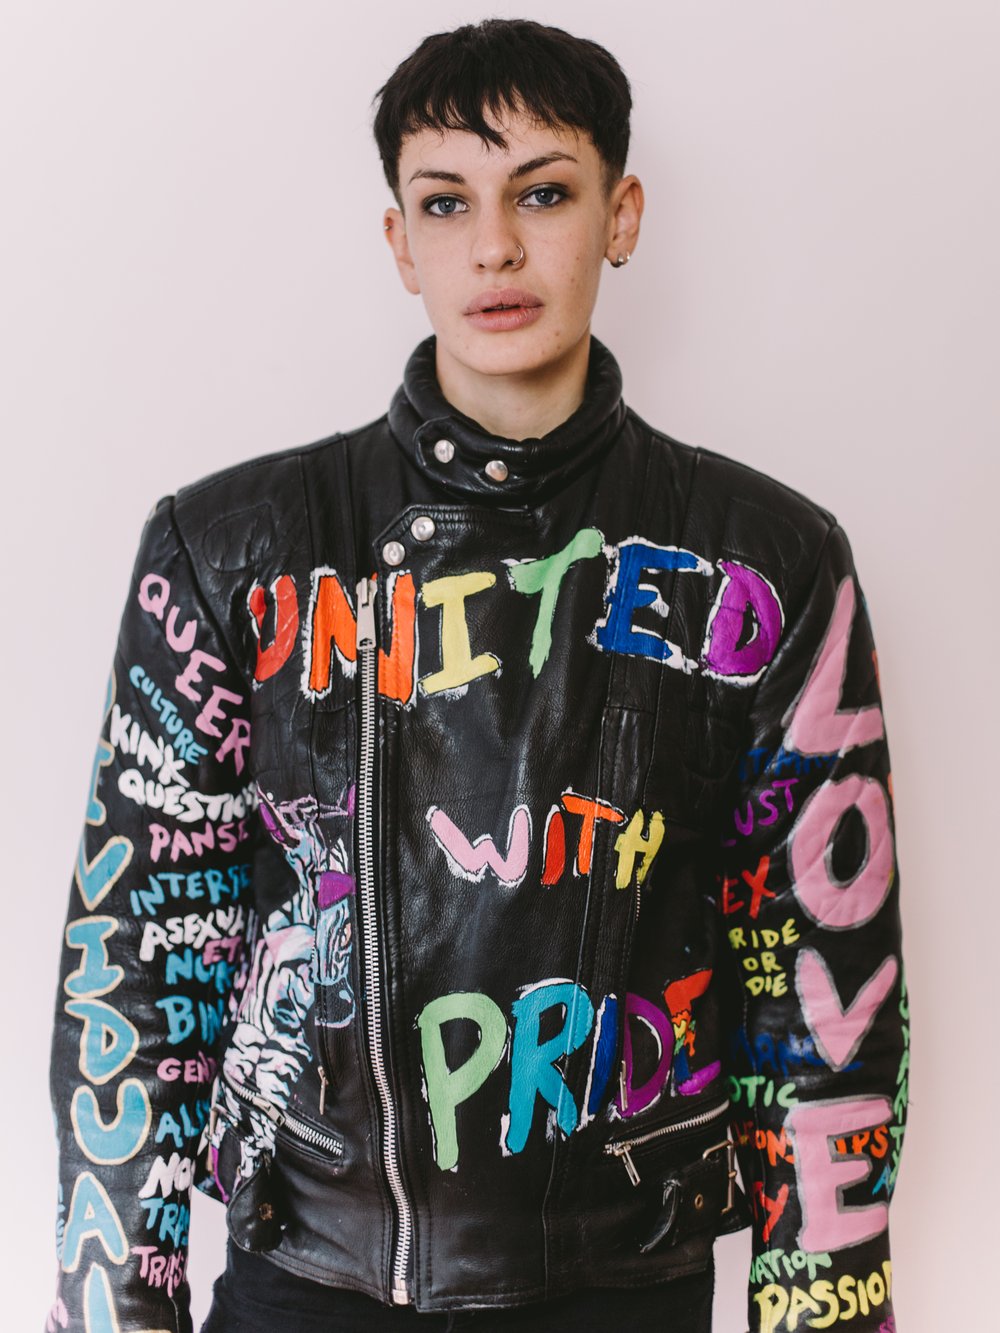 "UNITED WITH INDIVIDUALITY, LOVE AND PRIDE WITHOUT JUDGEMENT" HAND PAINTED VINTAGE BIKER JACKET